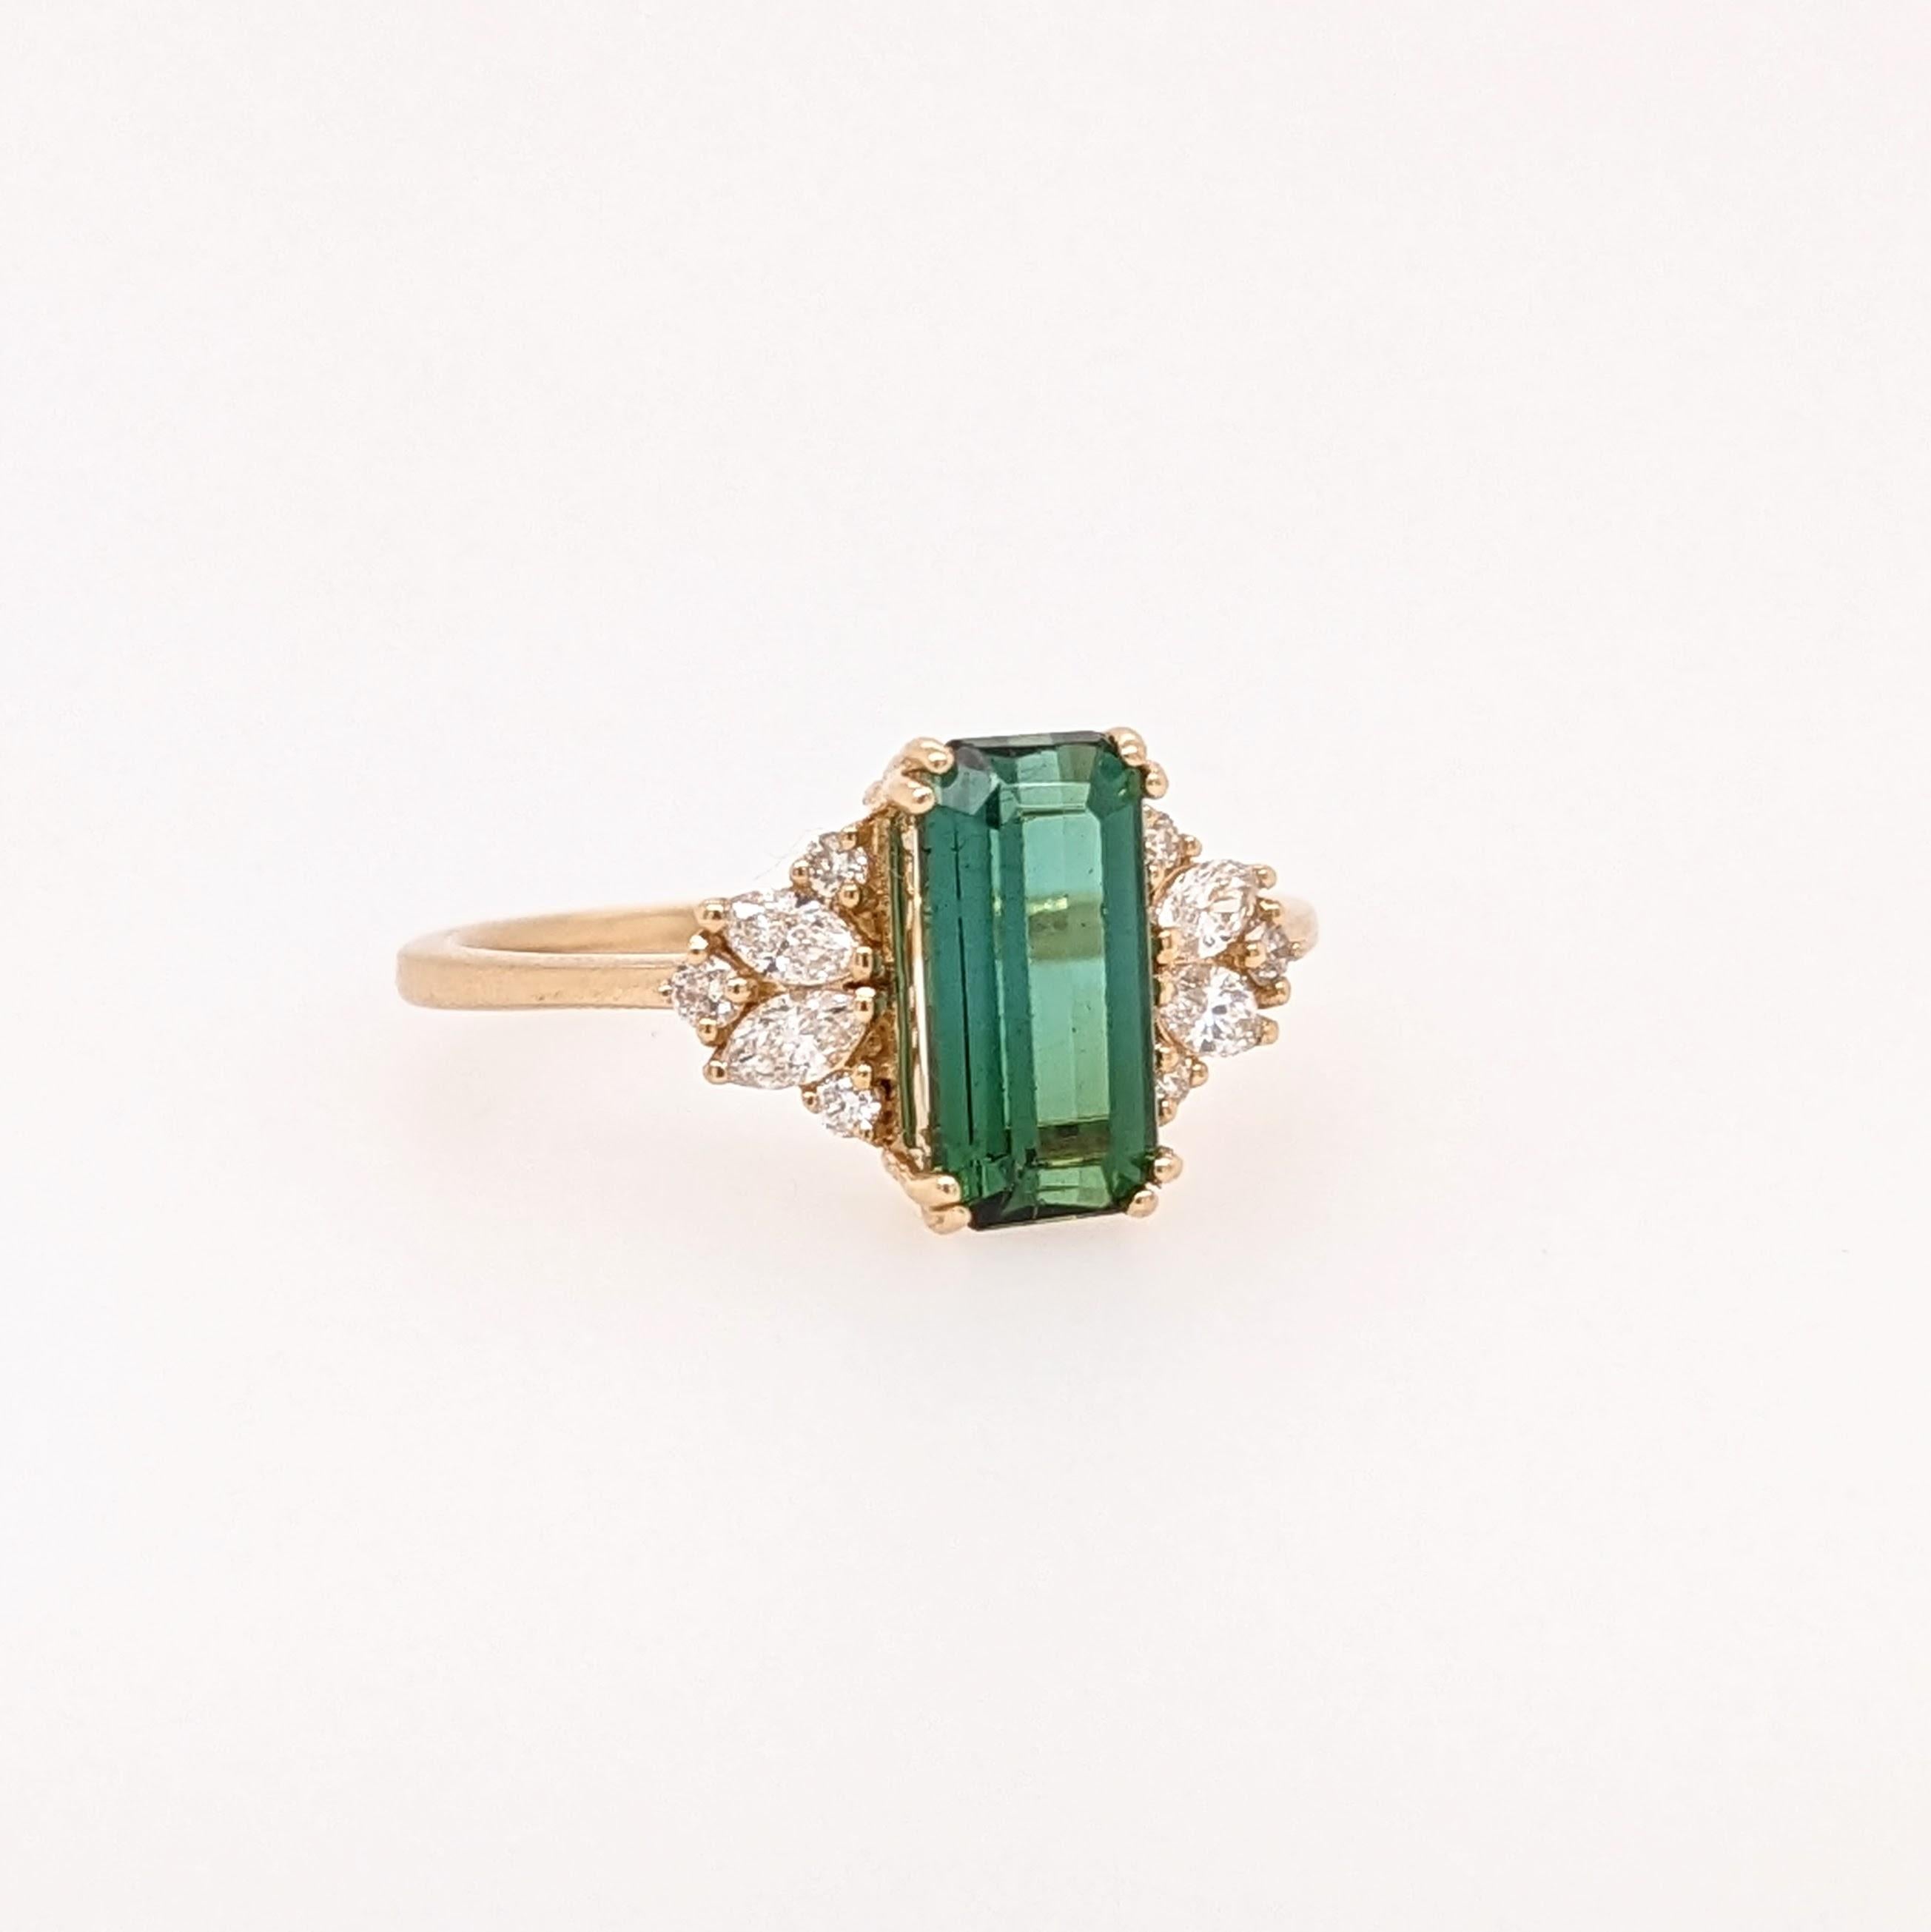 Specifications

Item Type: Ring
Center Stone: Tourmaline
Treatment: Heated
Weight: 1.51ct
Head size: 10x4mm
Cut: Emerald
Hardness: 7
Origin: Brazil

Metal: 14k/2.34g
Diamonds SI/GH: 10/0.25 cttw 

Sku: AJR307/1759

This ring is made with 14K Gold